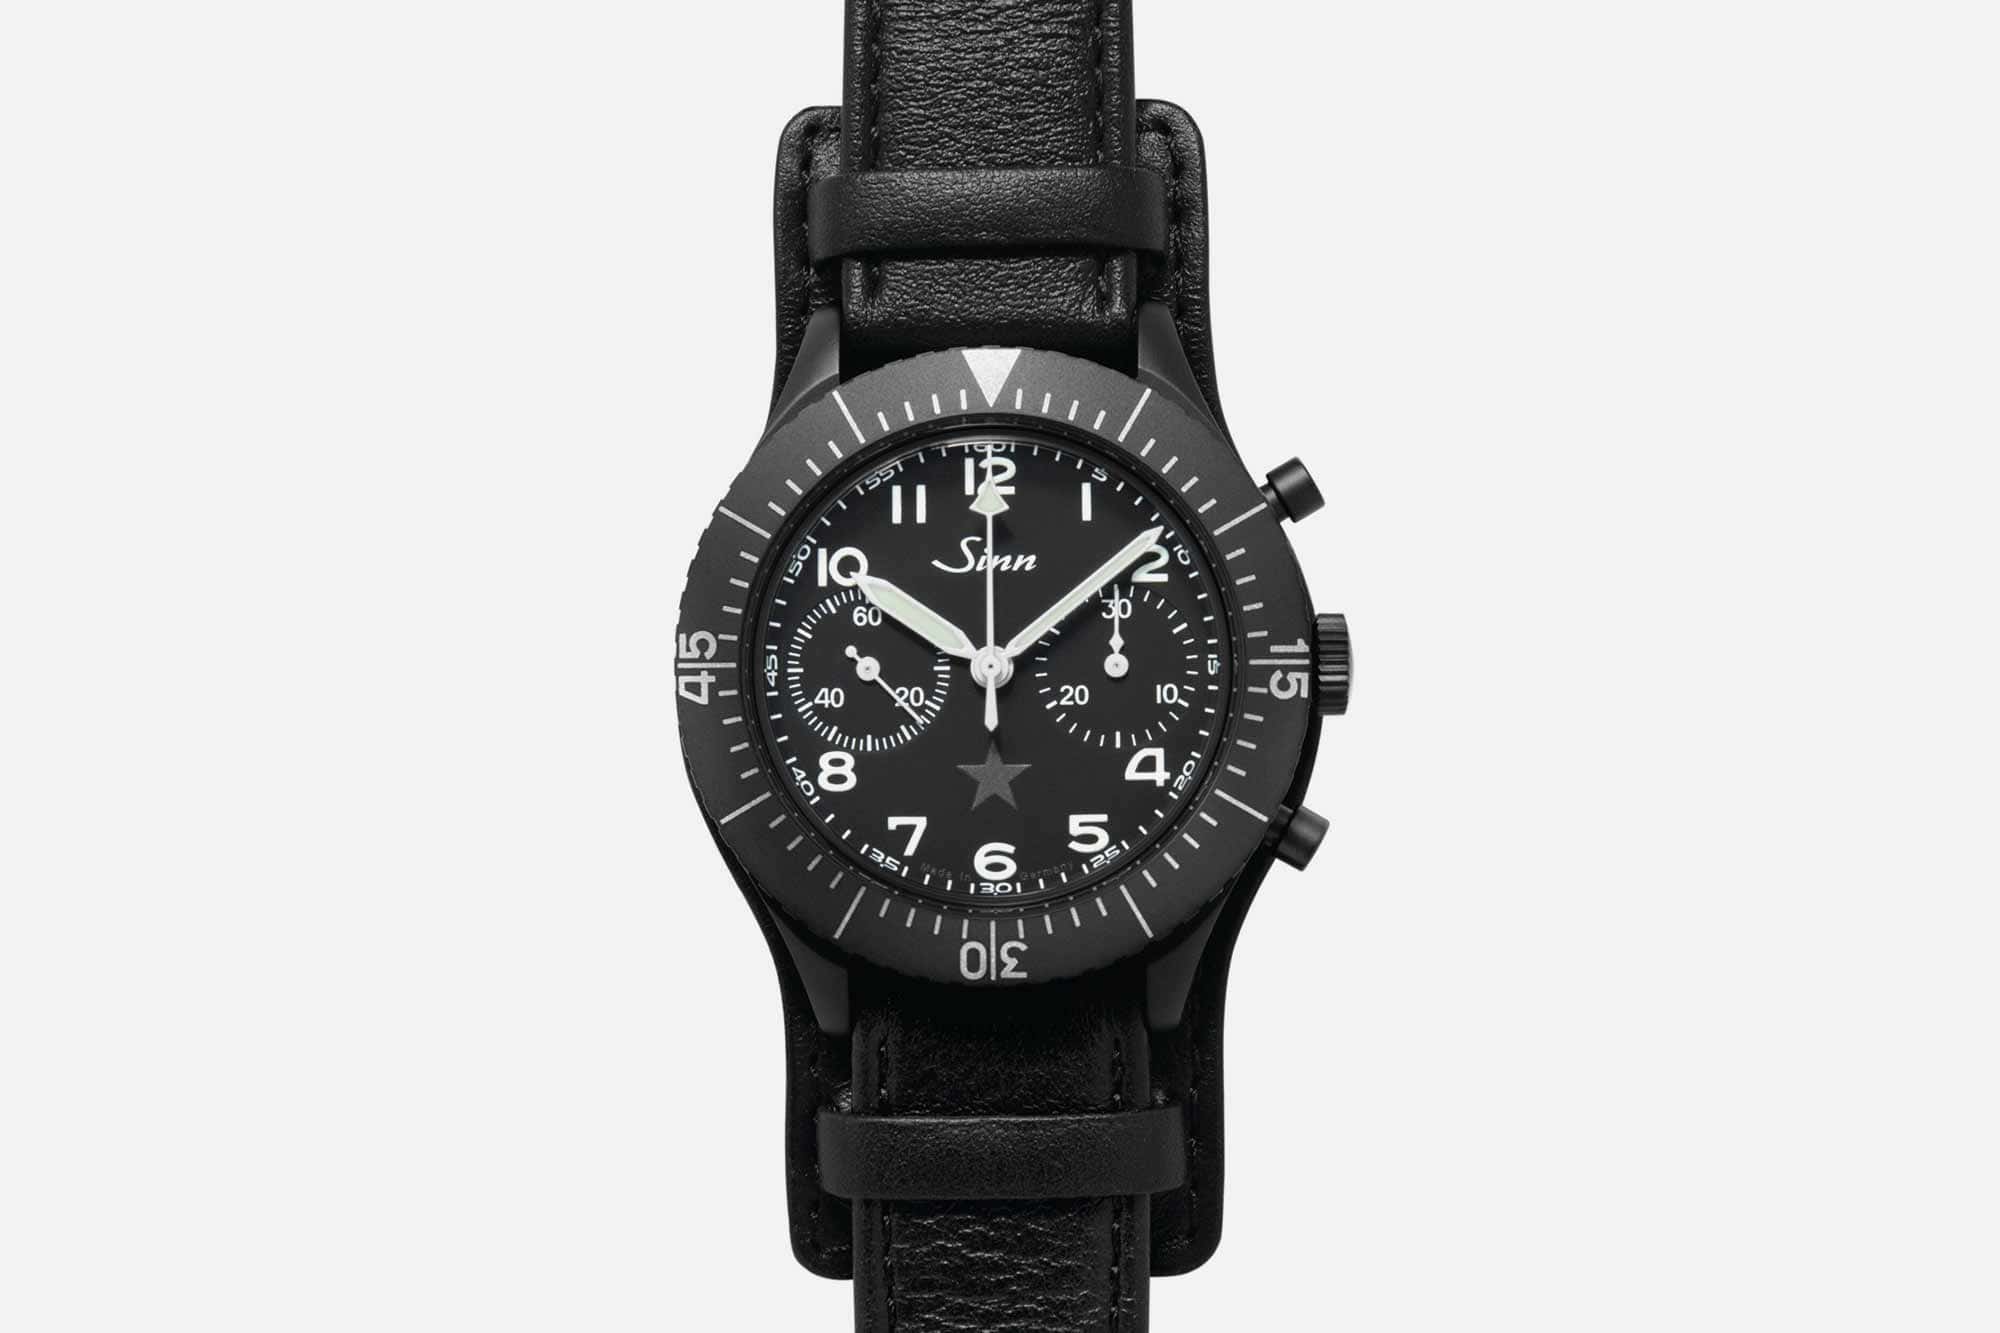 Revolution and Sinn Team Up for a First of its Kind 155 Chronograph